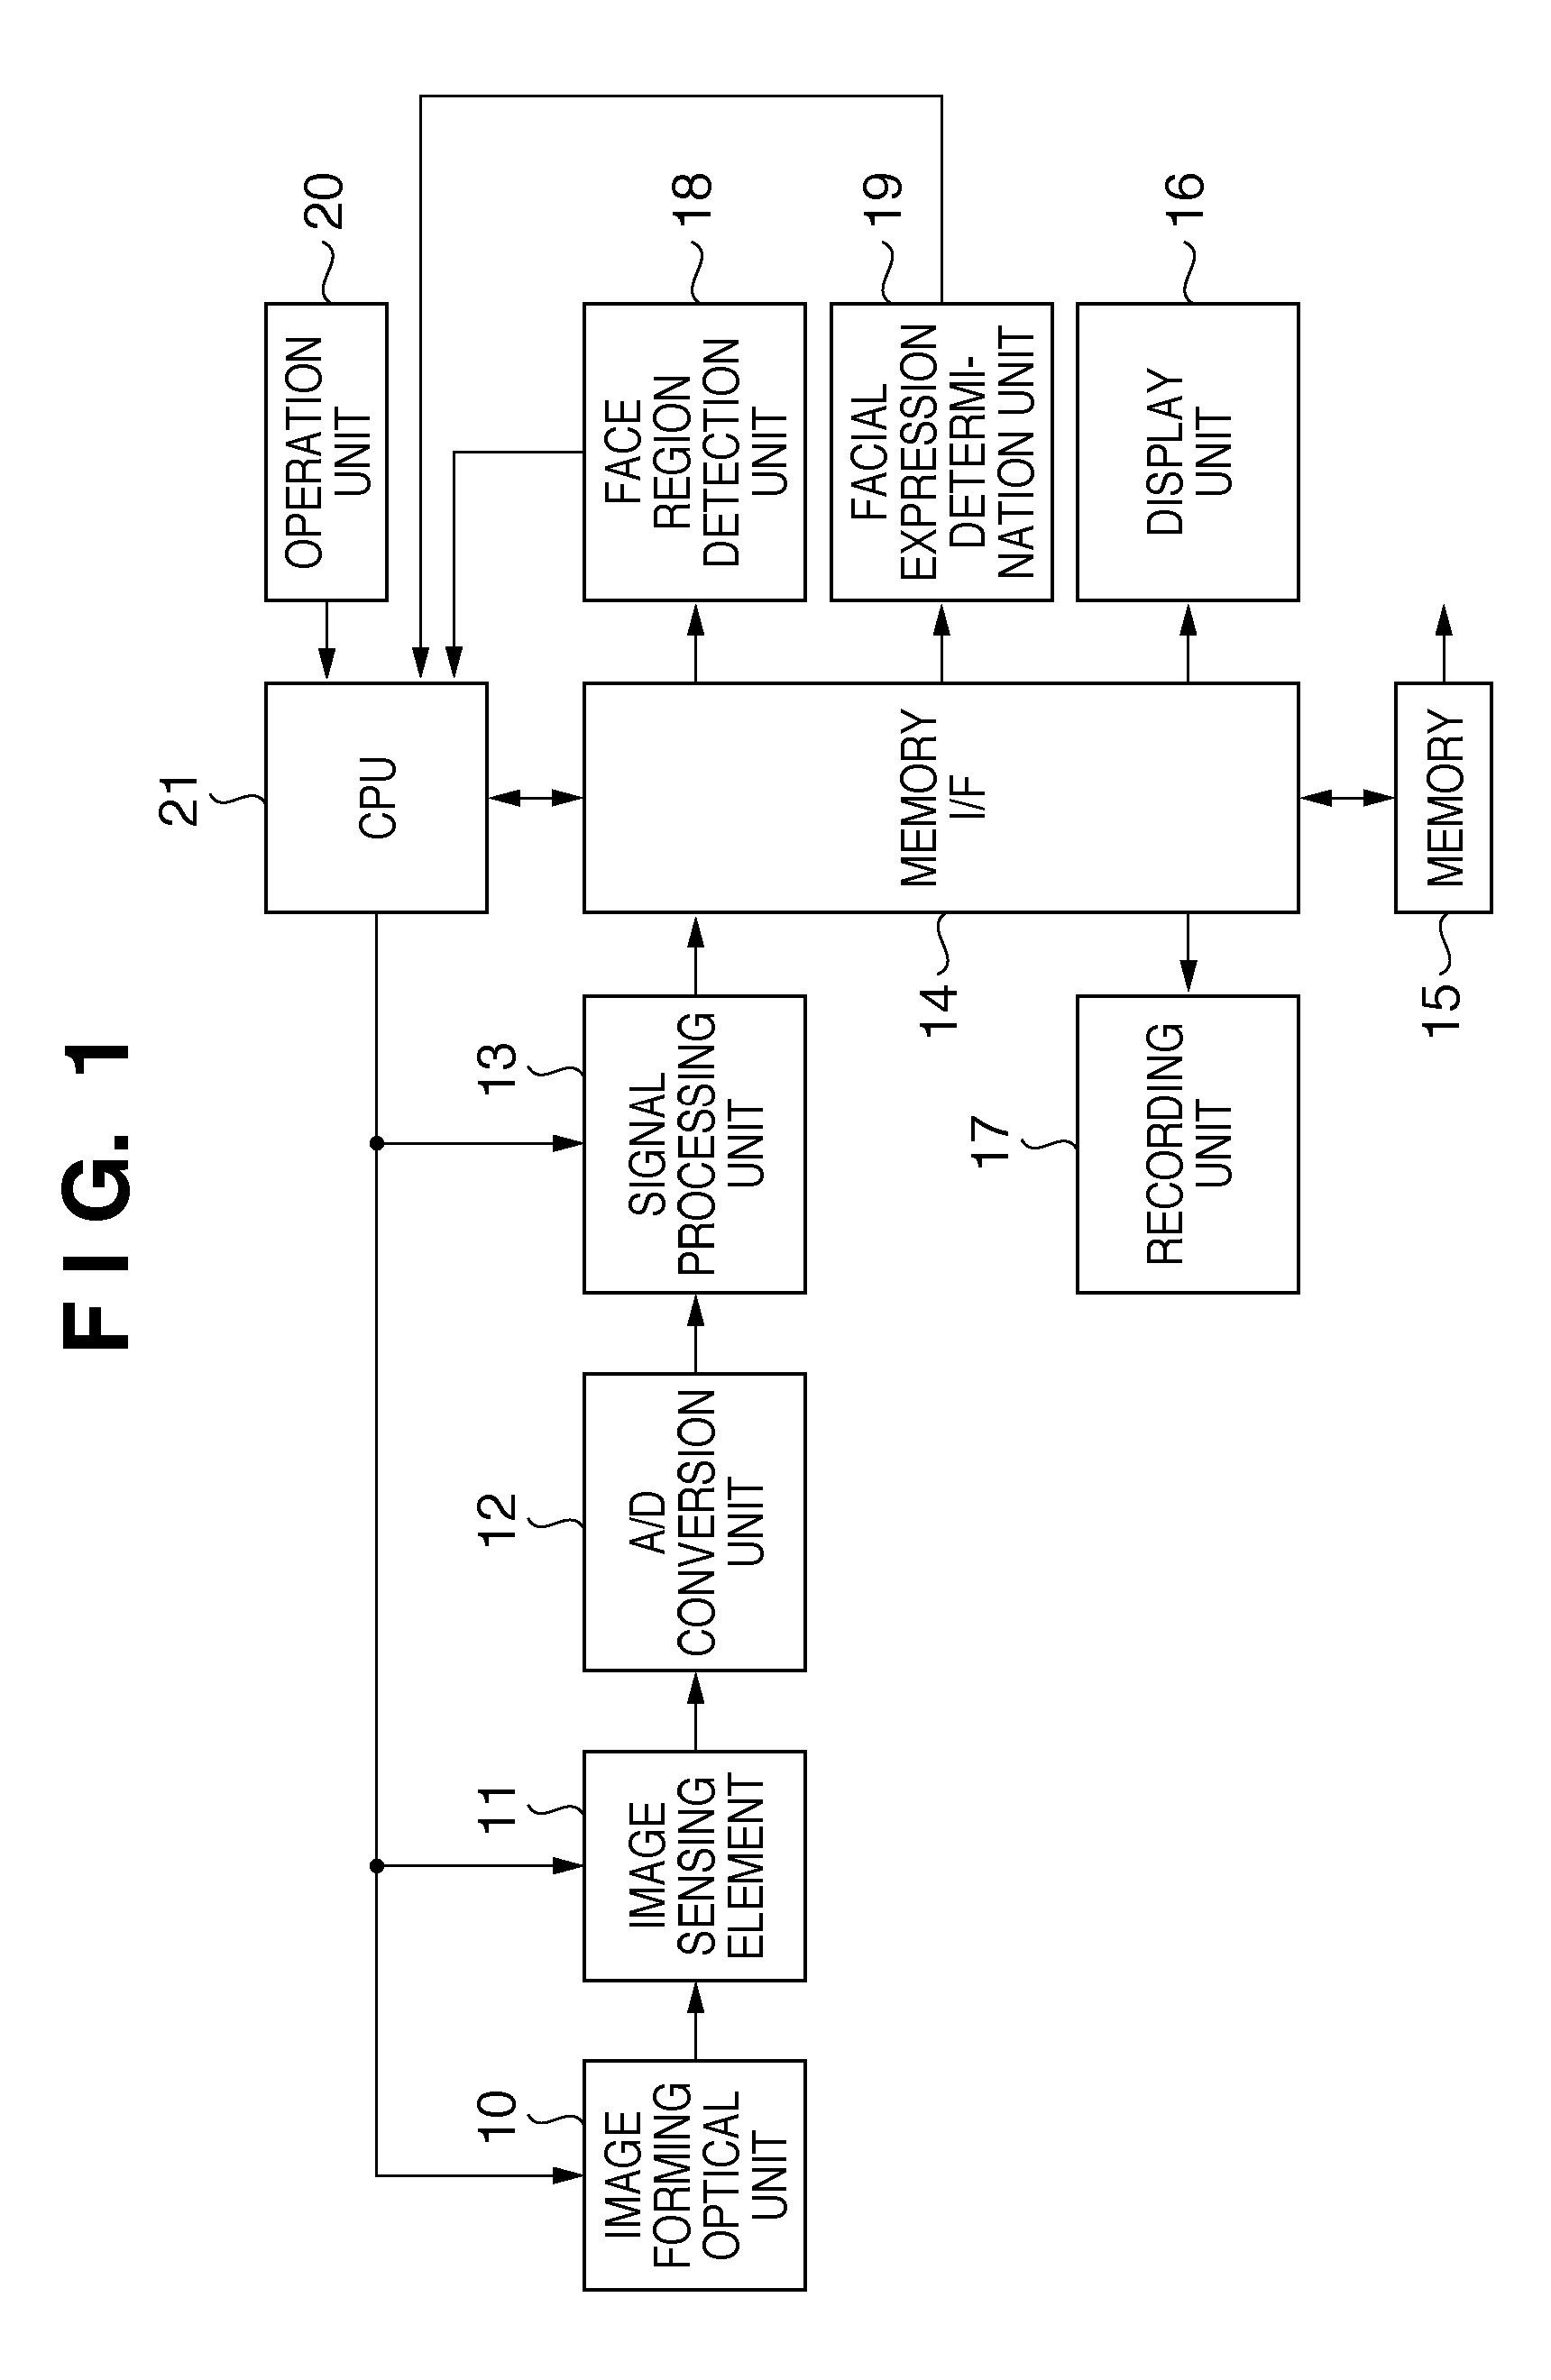 Image sensing apparatus, image capturing method, and program related to face detection